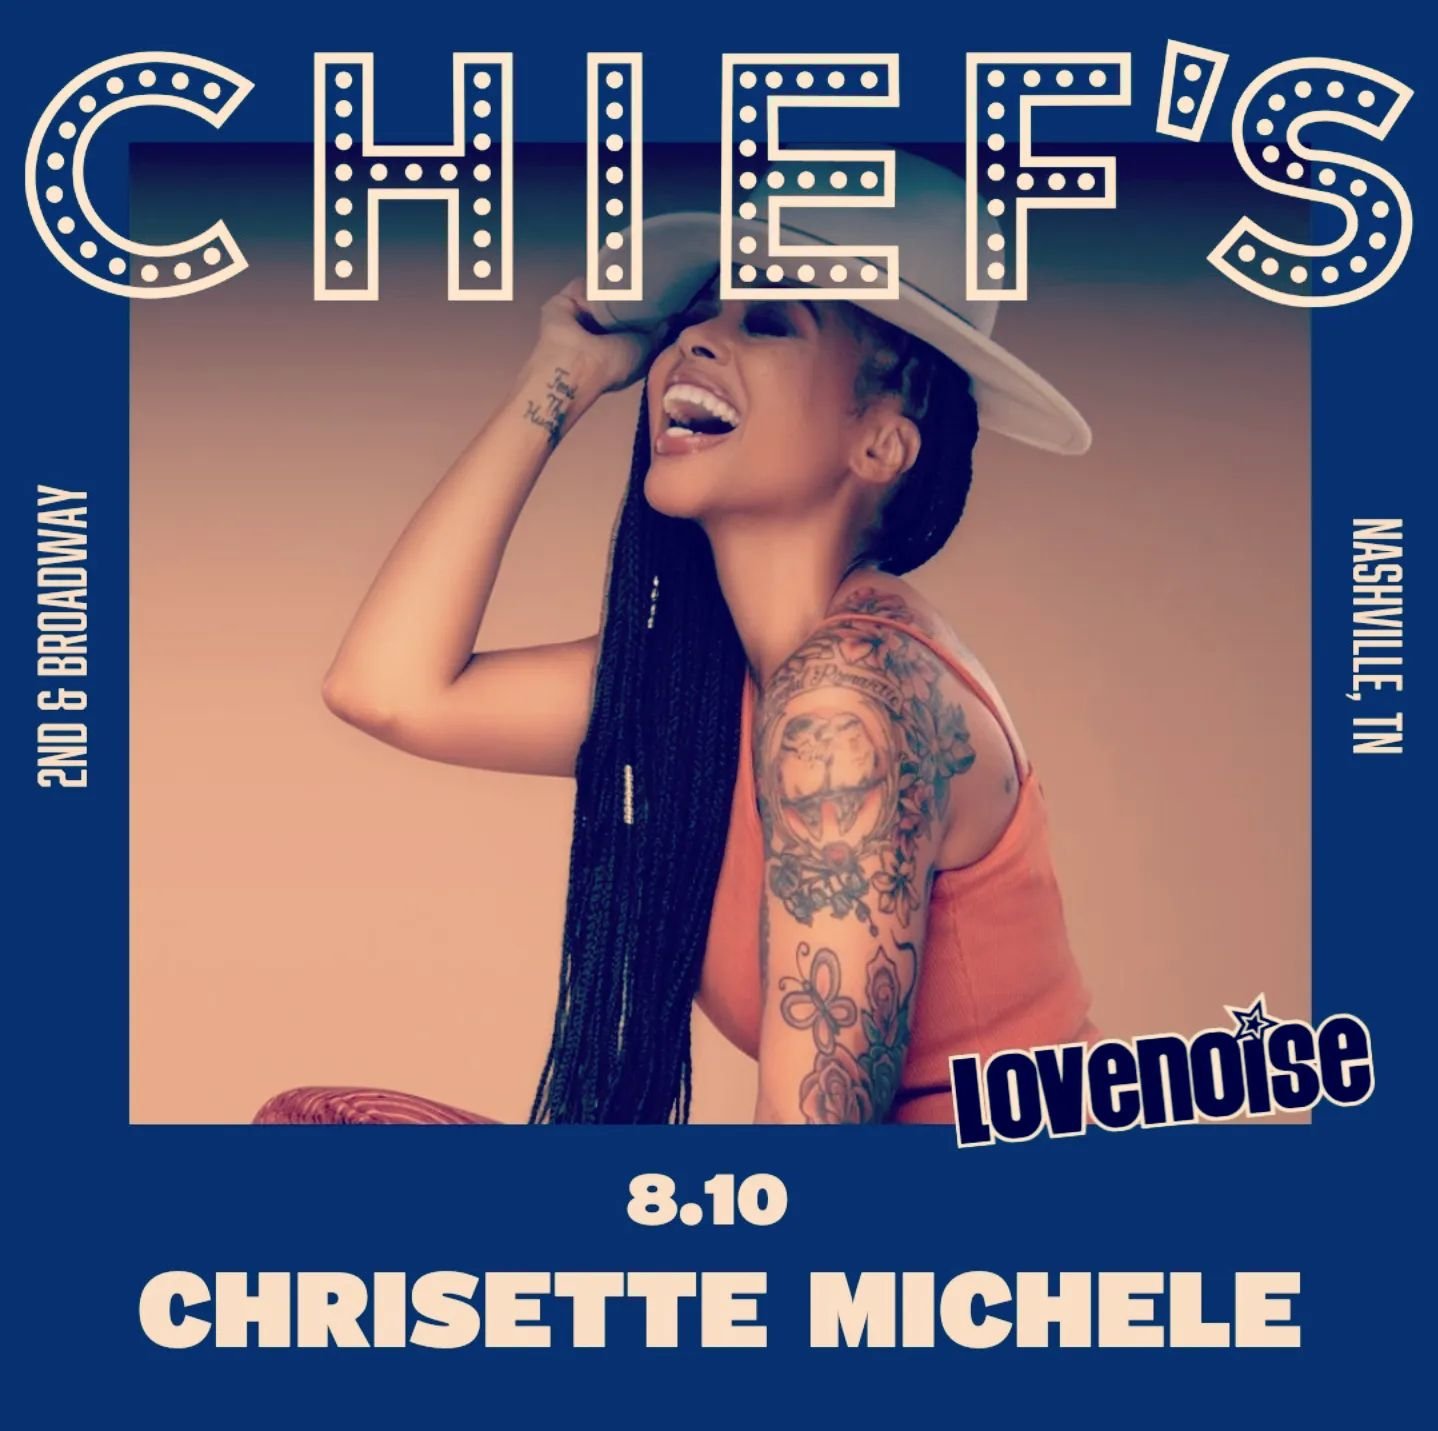 JUST ANNOUNCED: @chrisettemichele is coming back to Nashville on August 10th! This time she is hitting BROADWAY's newest live music venue @chiefsbroadway 

Join LOVENOISE for a wonderful night of good soul music in the heart of the city! 

Tickets on